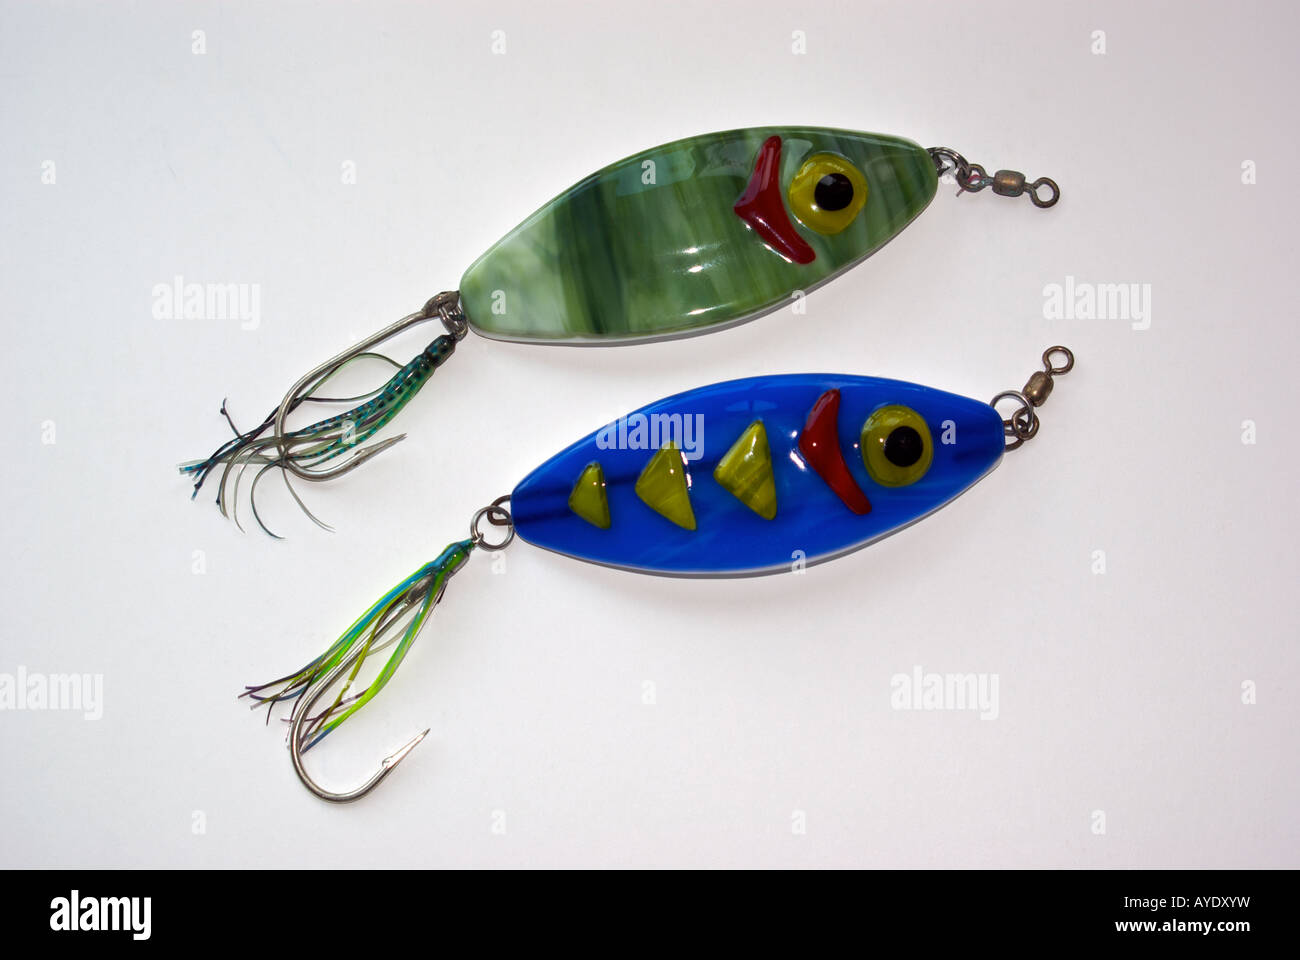 Firefish glass trolling lures used to catch salmon and bottom fish